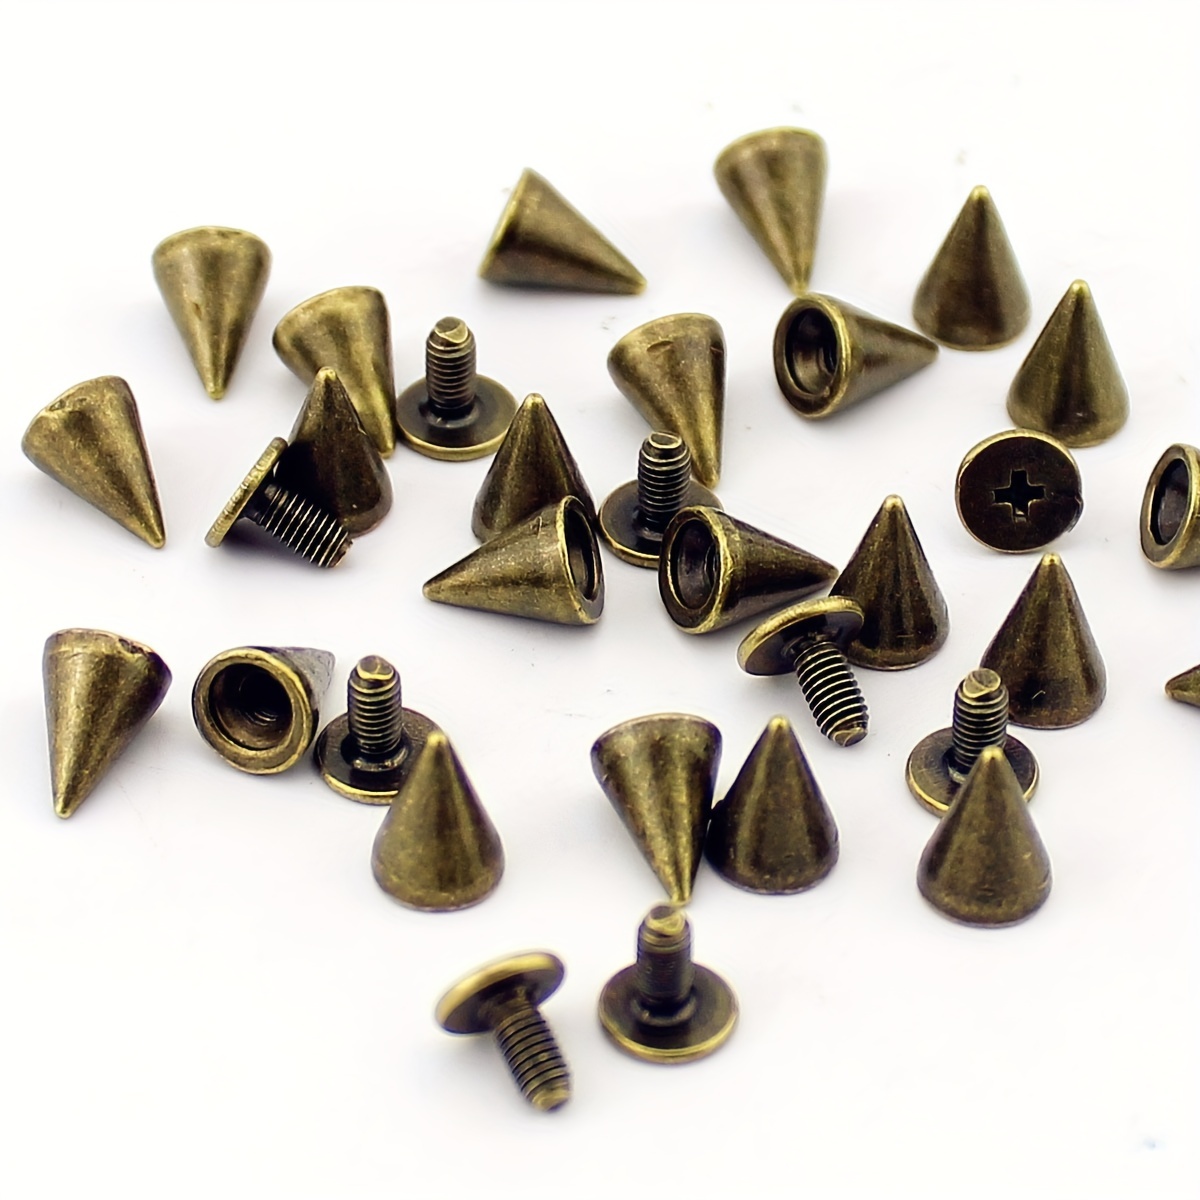 100 Sets 9.5mm Mixed Color Spikes and Studs Metal Bullet Cone Spikes Screw Back Leather Craft Rapid Rivet Screws Punk Studs and Spikes for Clothing